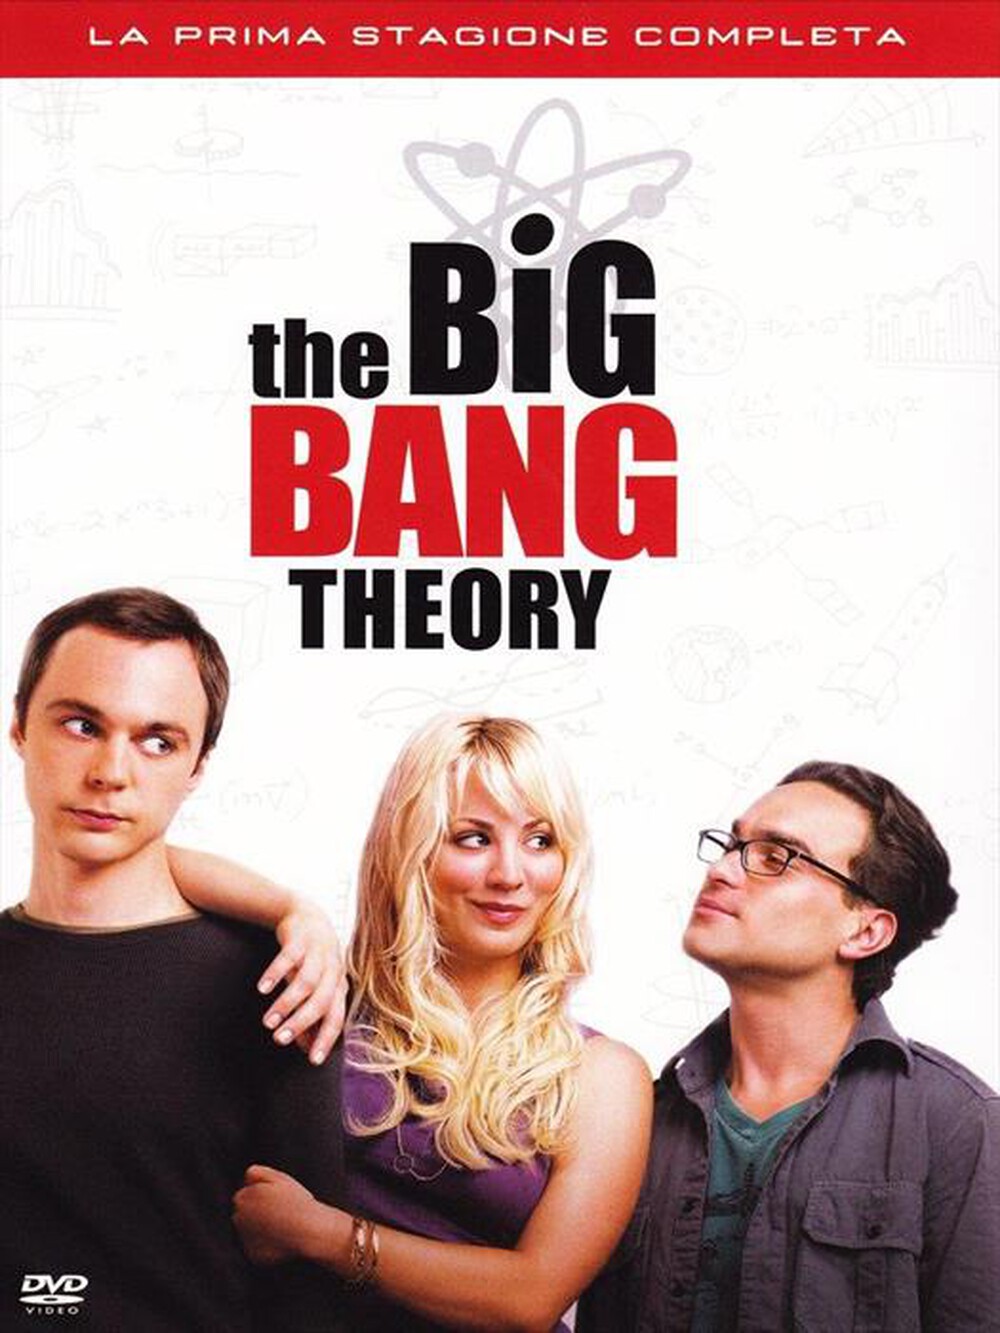 "WARNER HOME VIDEO - Big Bang Theory (The) - Stagione 01 (3 Dvd) - "